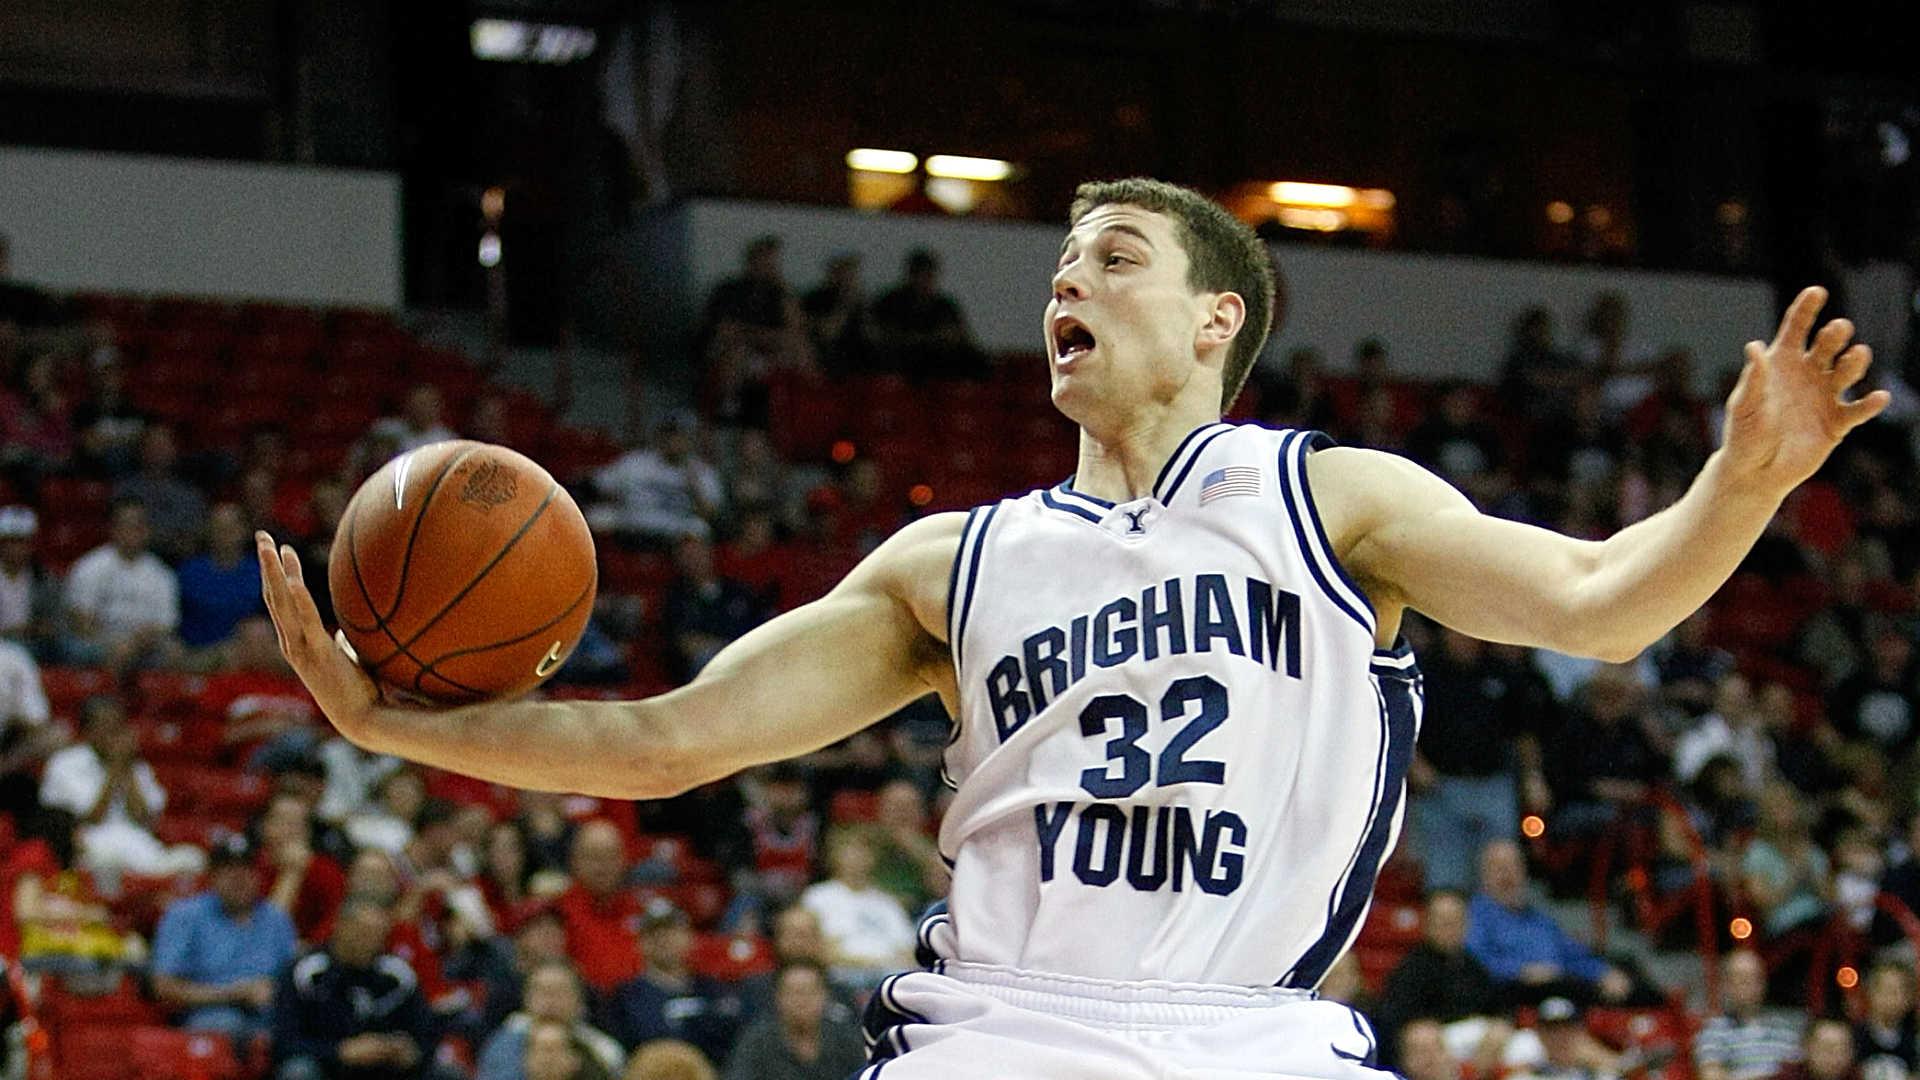 Jimmer Fredette explodes for 73 points in Chinese league game. NBA